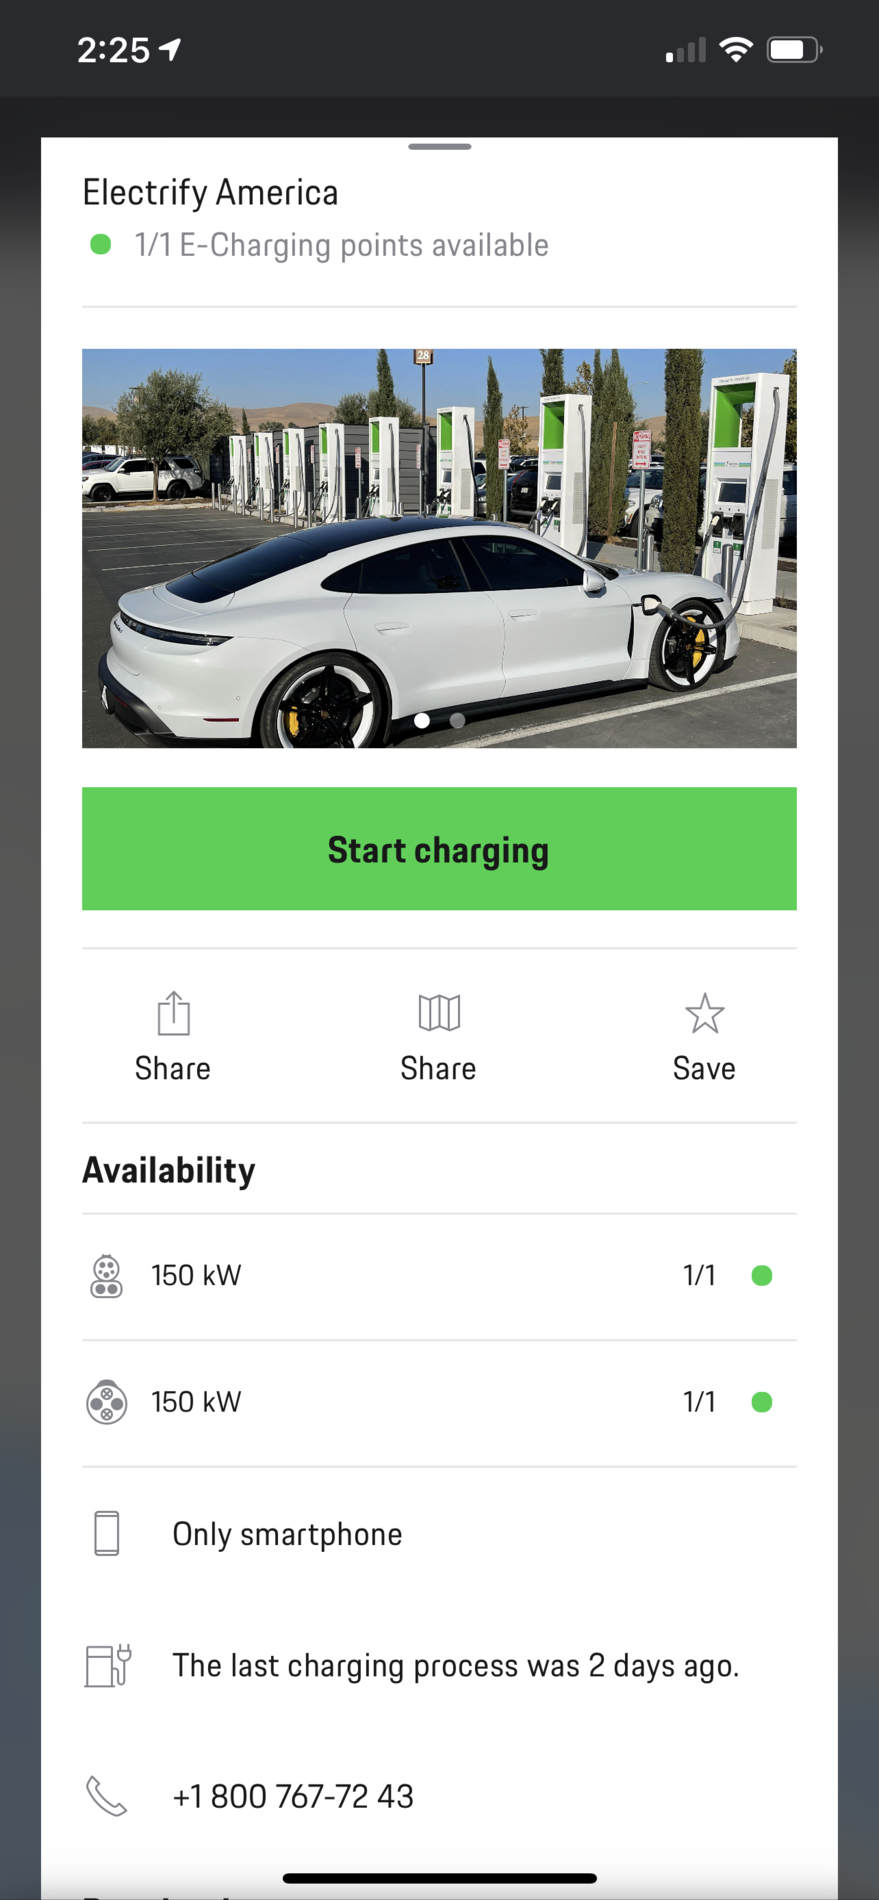 Porsche Taycan Bay Area folks, could you help me check this charging station image1